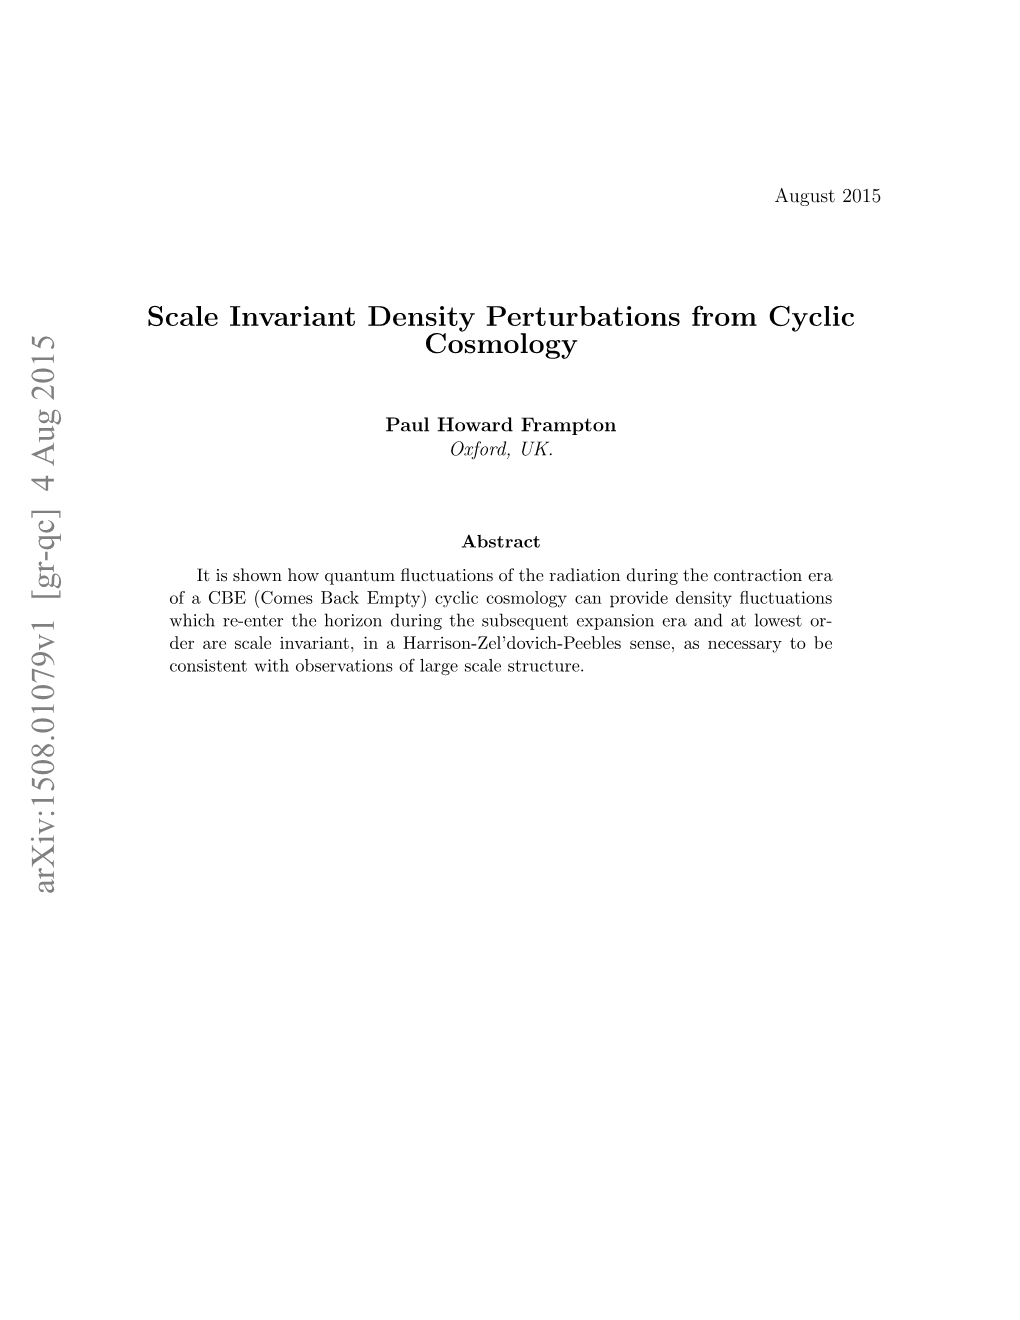 Scale Invariant Density Perturbations from Cyclic Cosmology